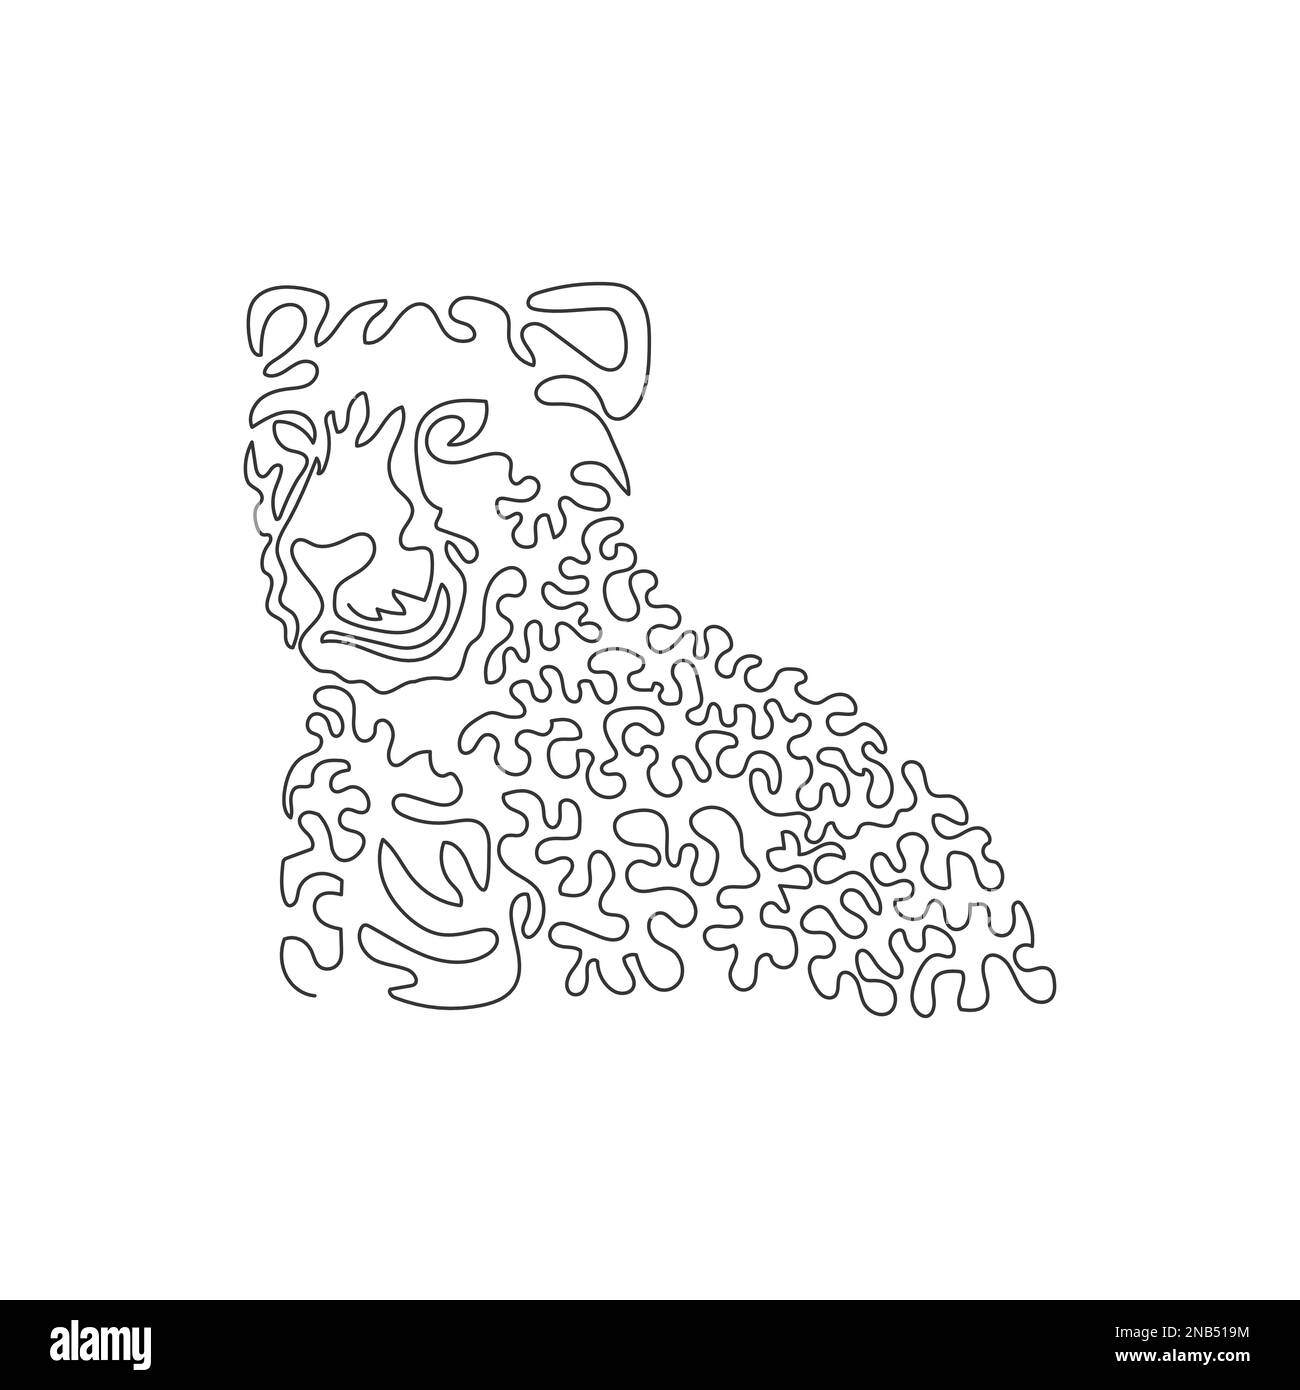 Single curly one line drawing abstract art. The cheetah eyeing prey. Continuous line draw graphic design vector illustration of scary cheetah for icon Stock Vector